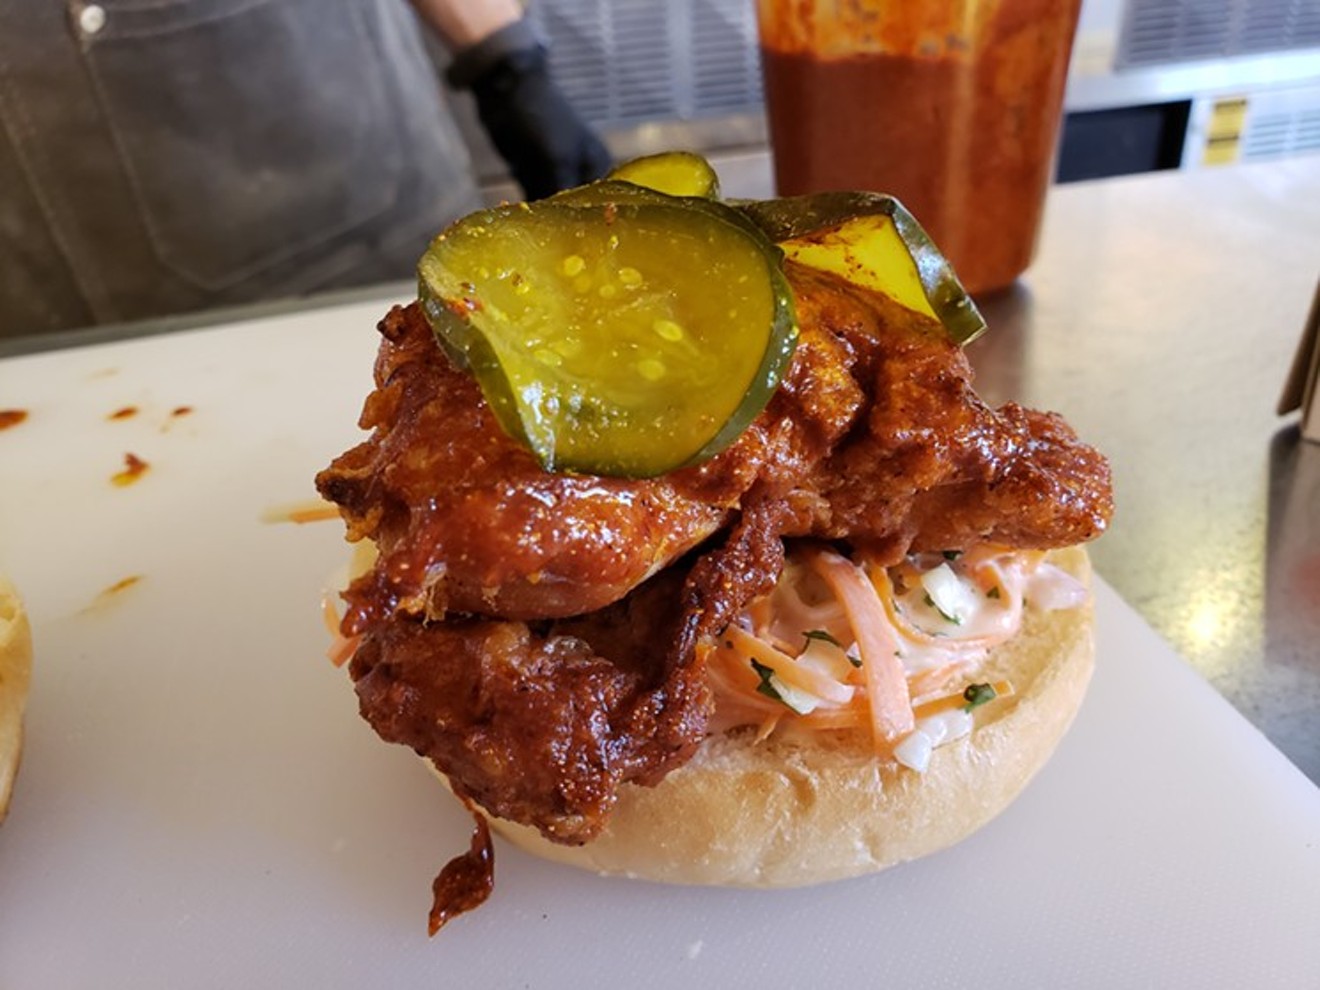 The Budlong Hot Chicken is sending good sandwiches your way.